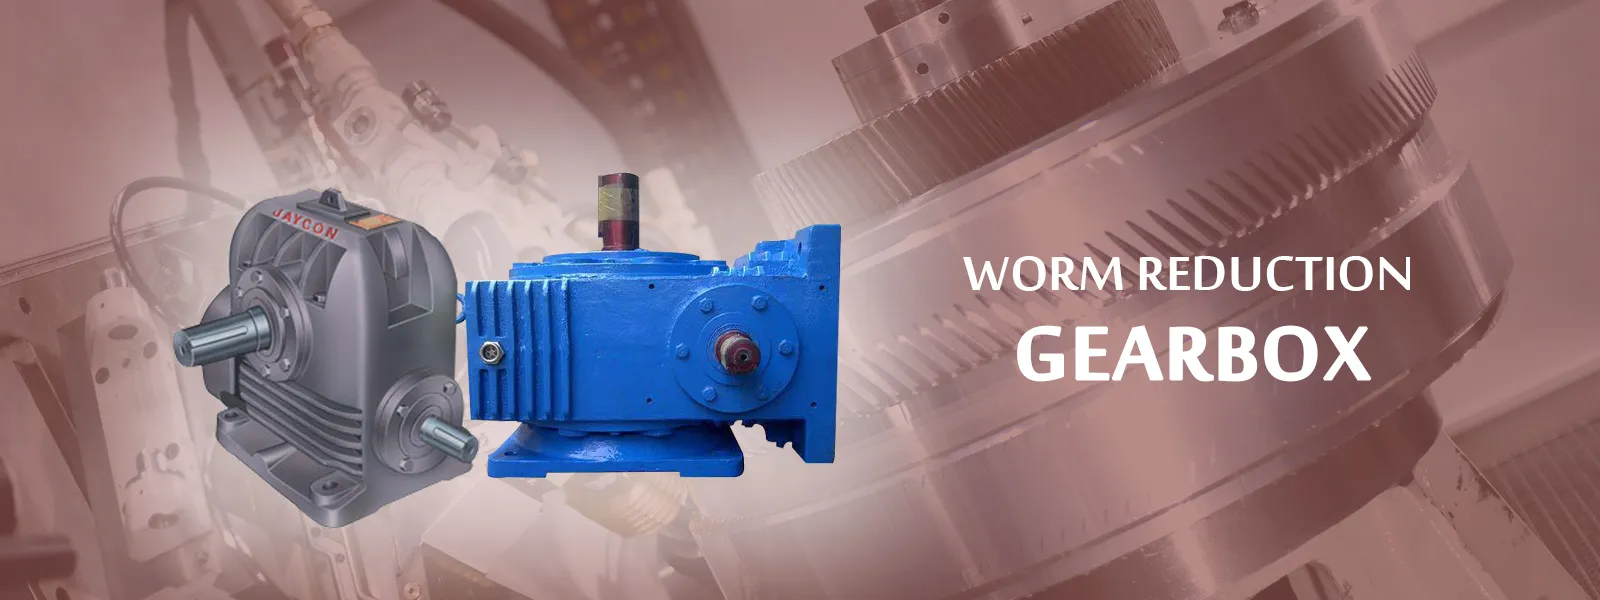 worm reduction gearbox manufacturer in india